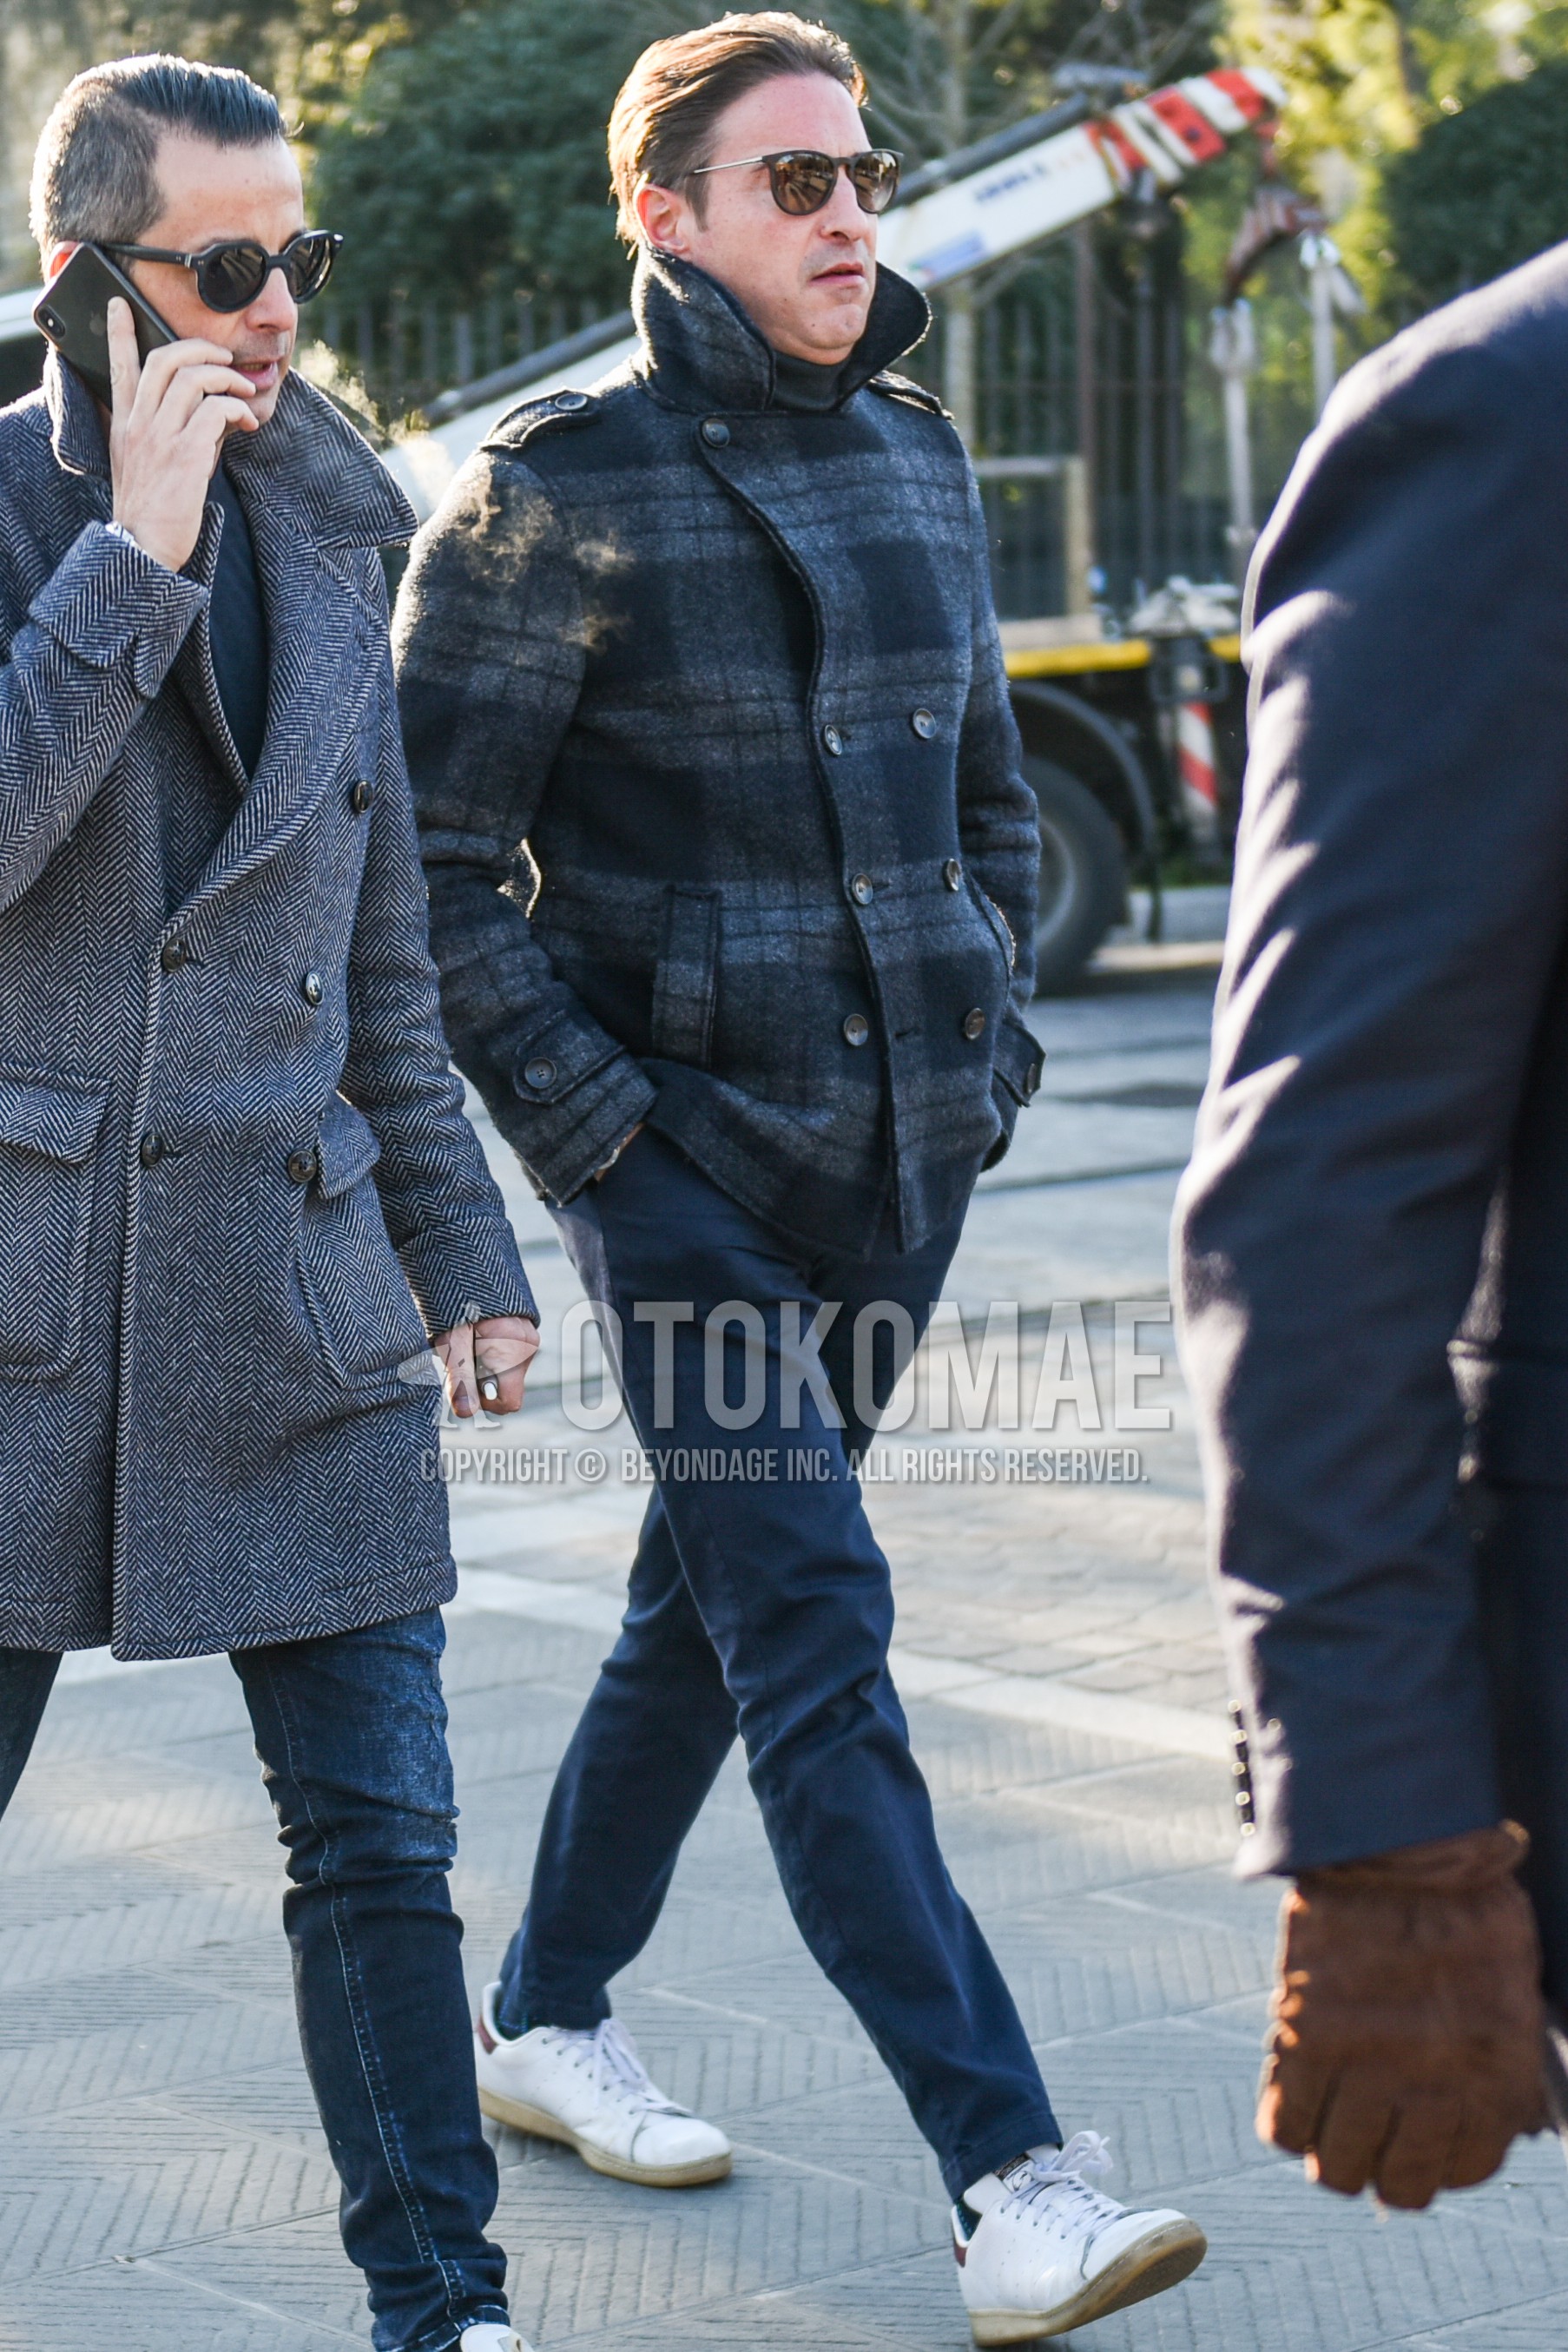 Men's autumn winter outfit with black plain sunglasses, gray check p coat, dark gray plain chinos, white low-cut sneakers.